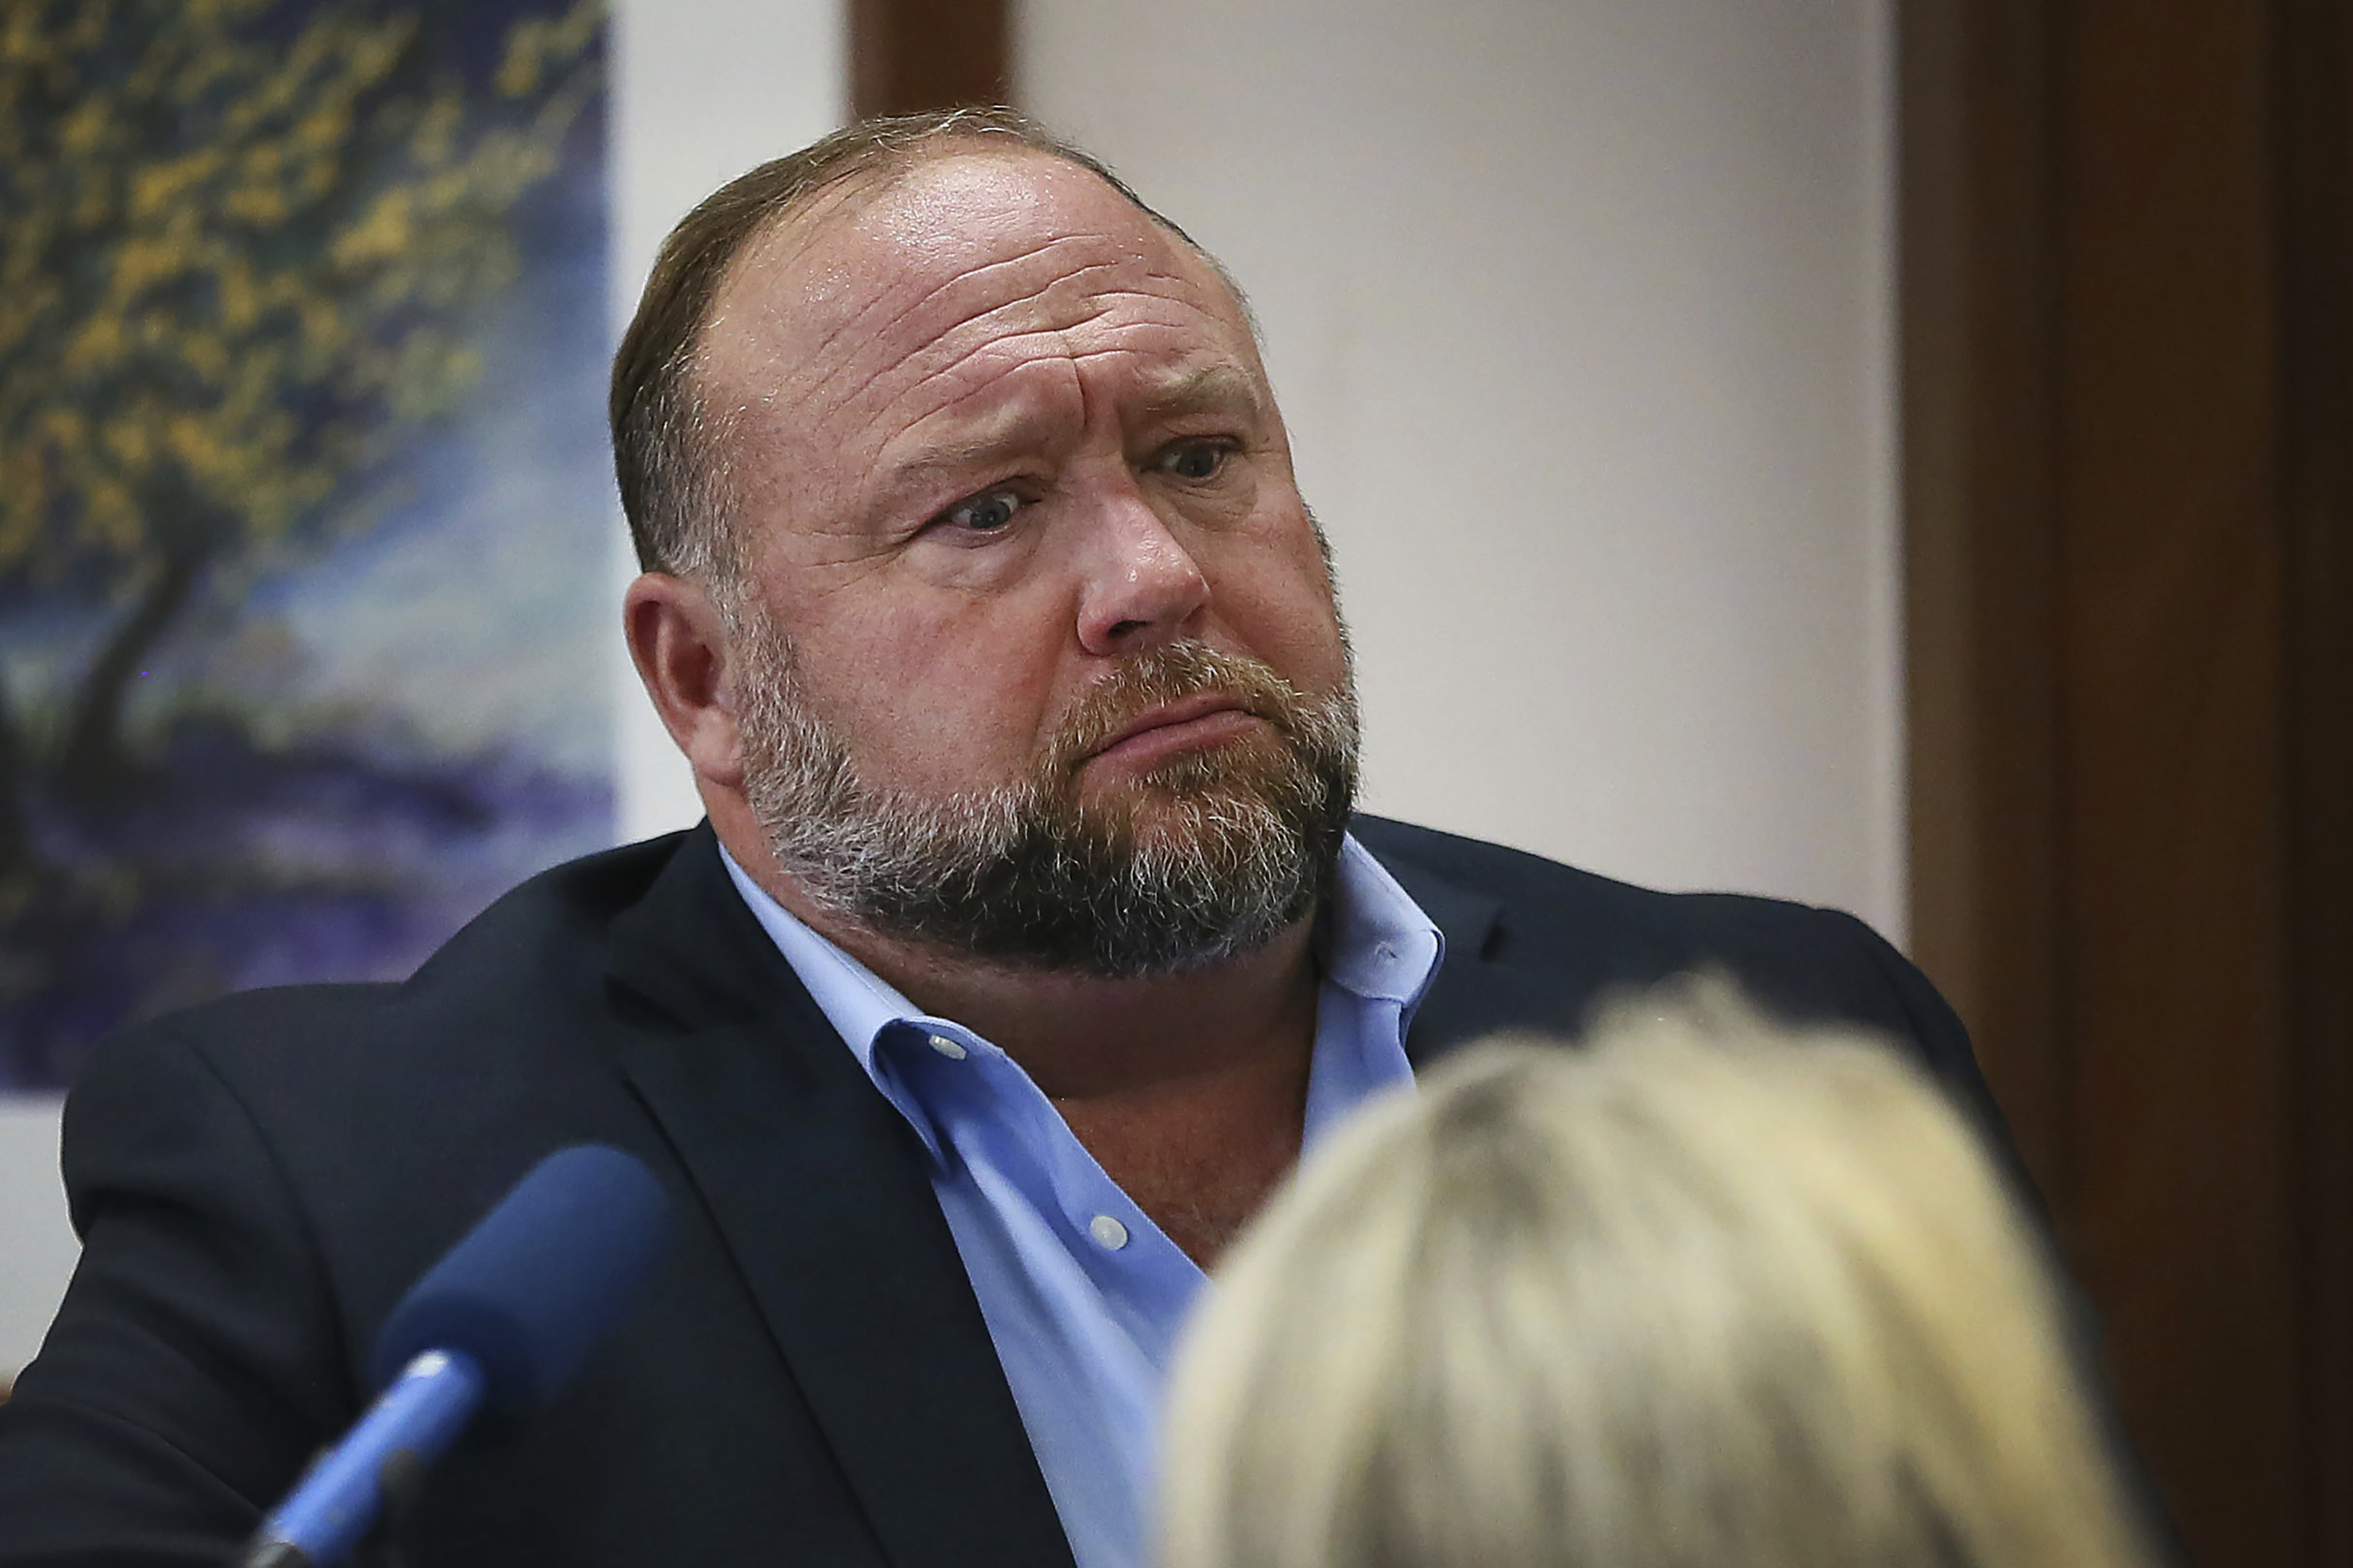 Conspiracy theorist Alex Jones attempts to answer questions about his emails during trial at the Travis County Courthouse in Austin, Texas, on Wednesday. Photo: Austin American-Statesman via AP